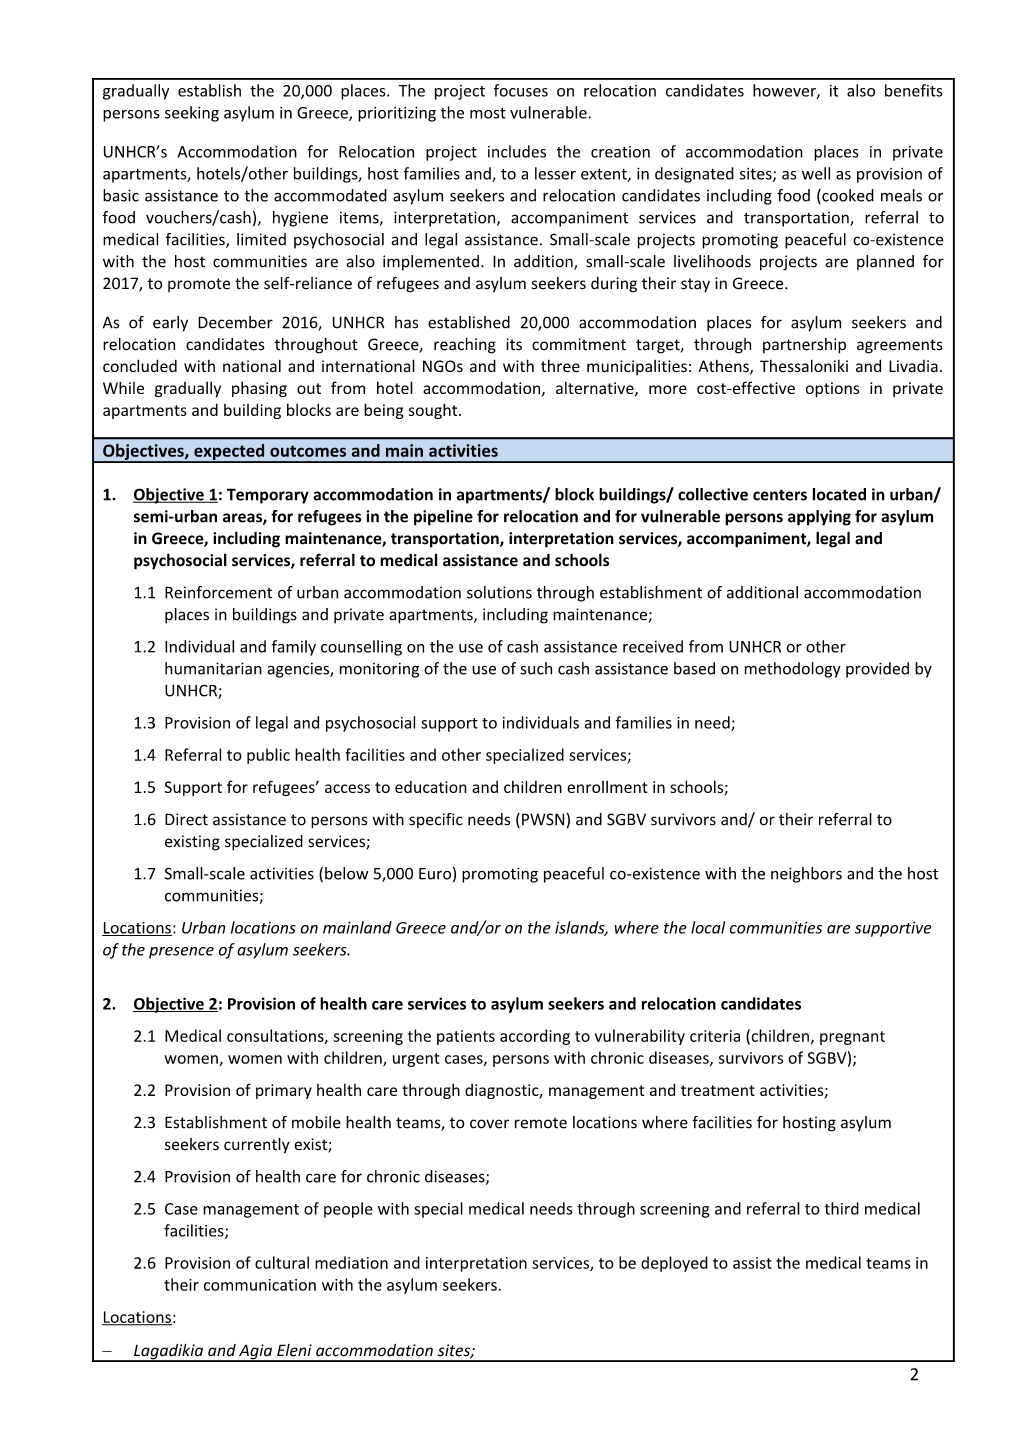 Annex A: Call for Expression of Interest-Announced by Unhcr